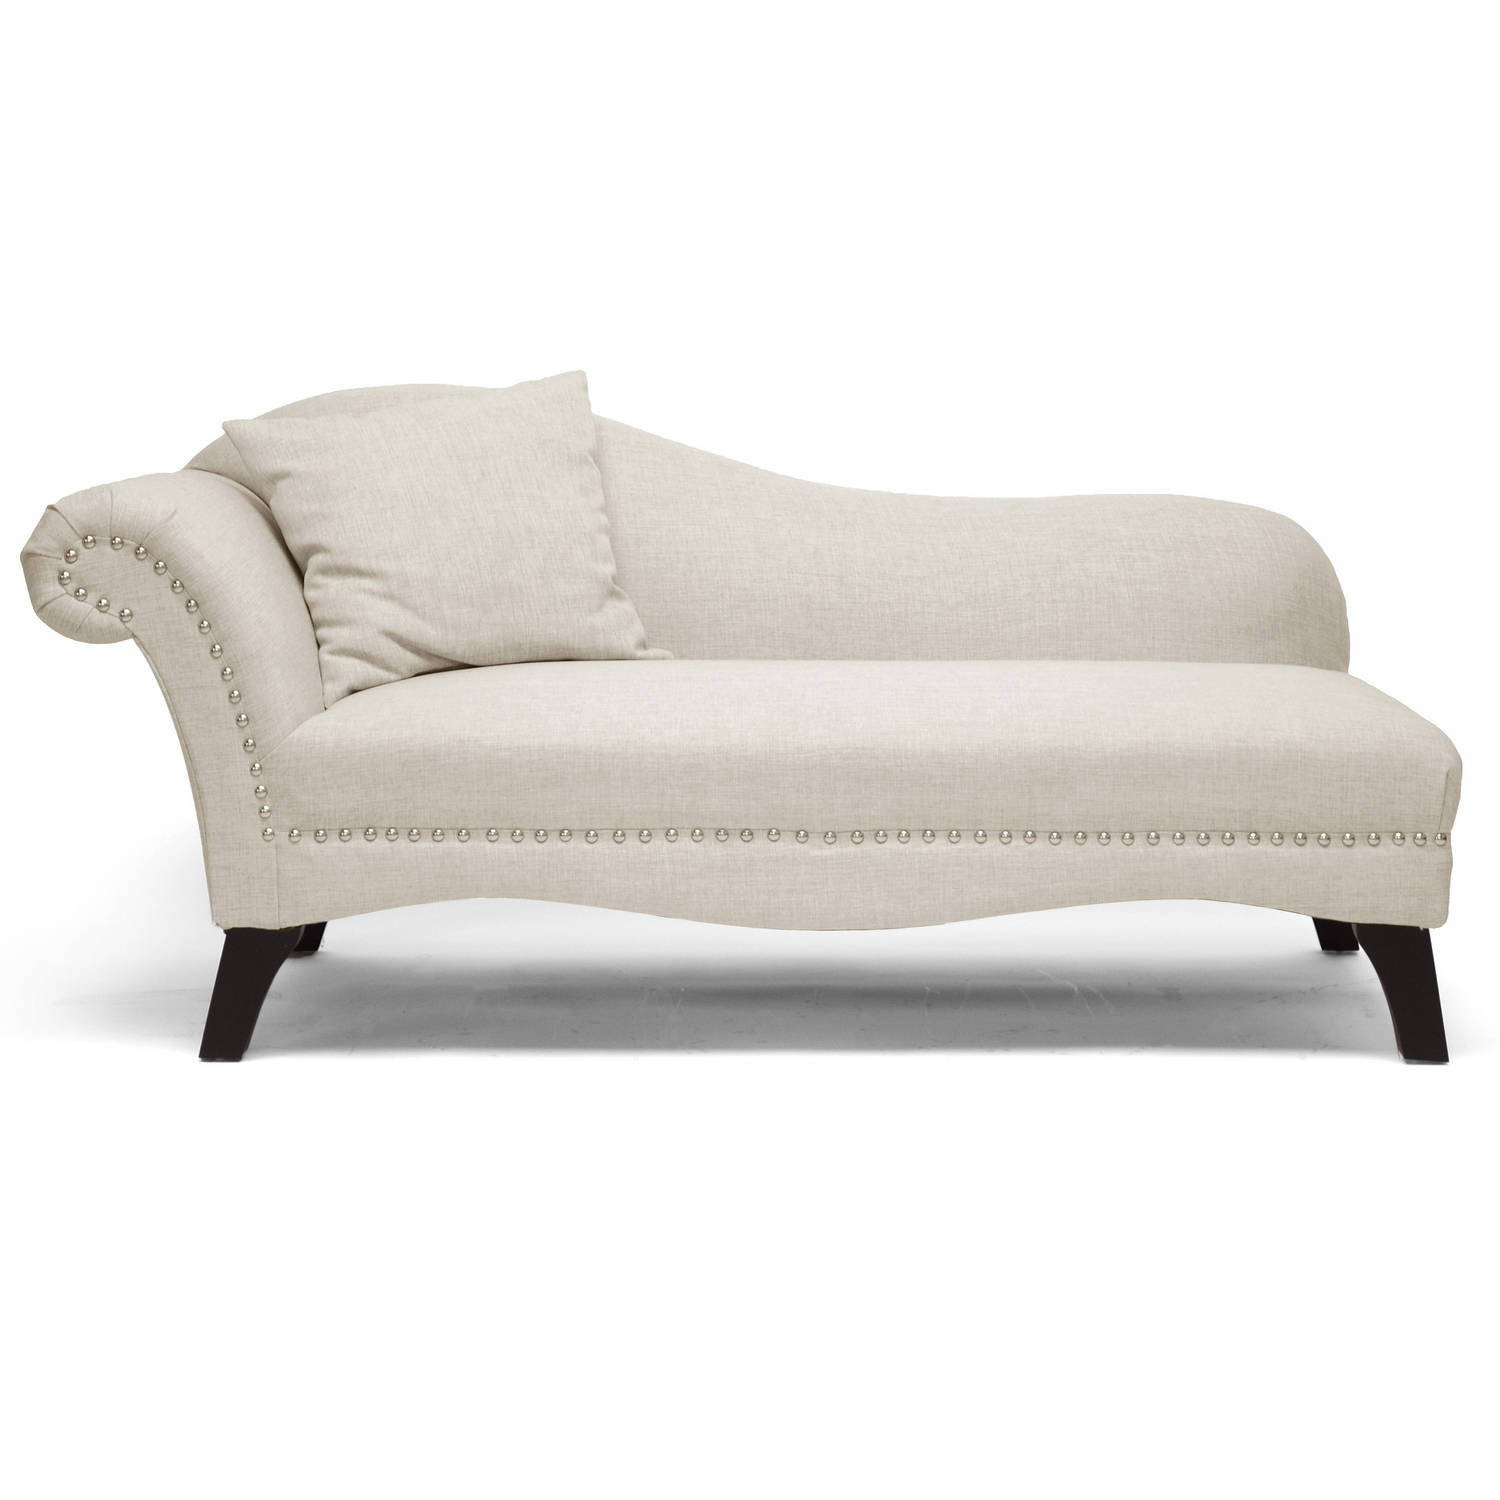 How to buy a chaise lounge?